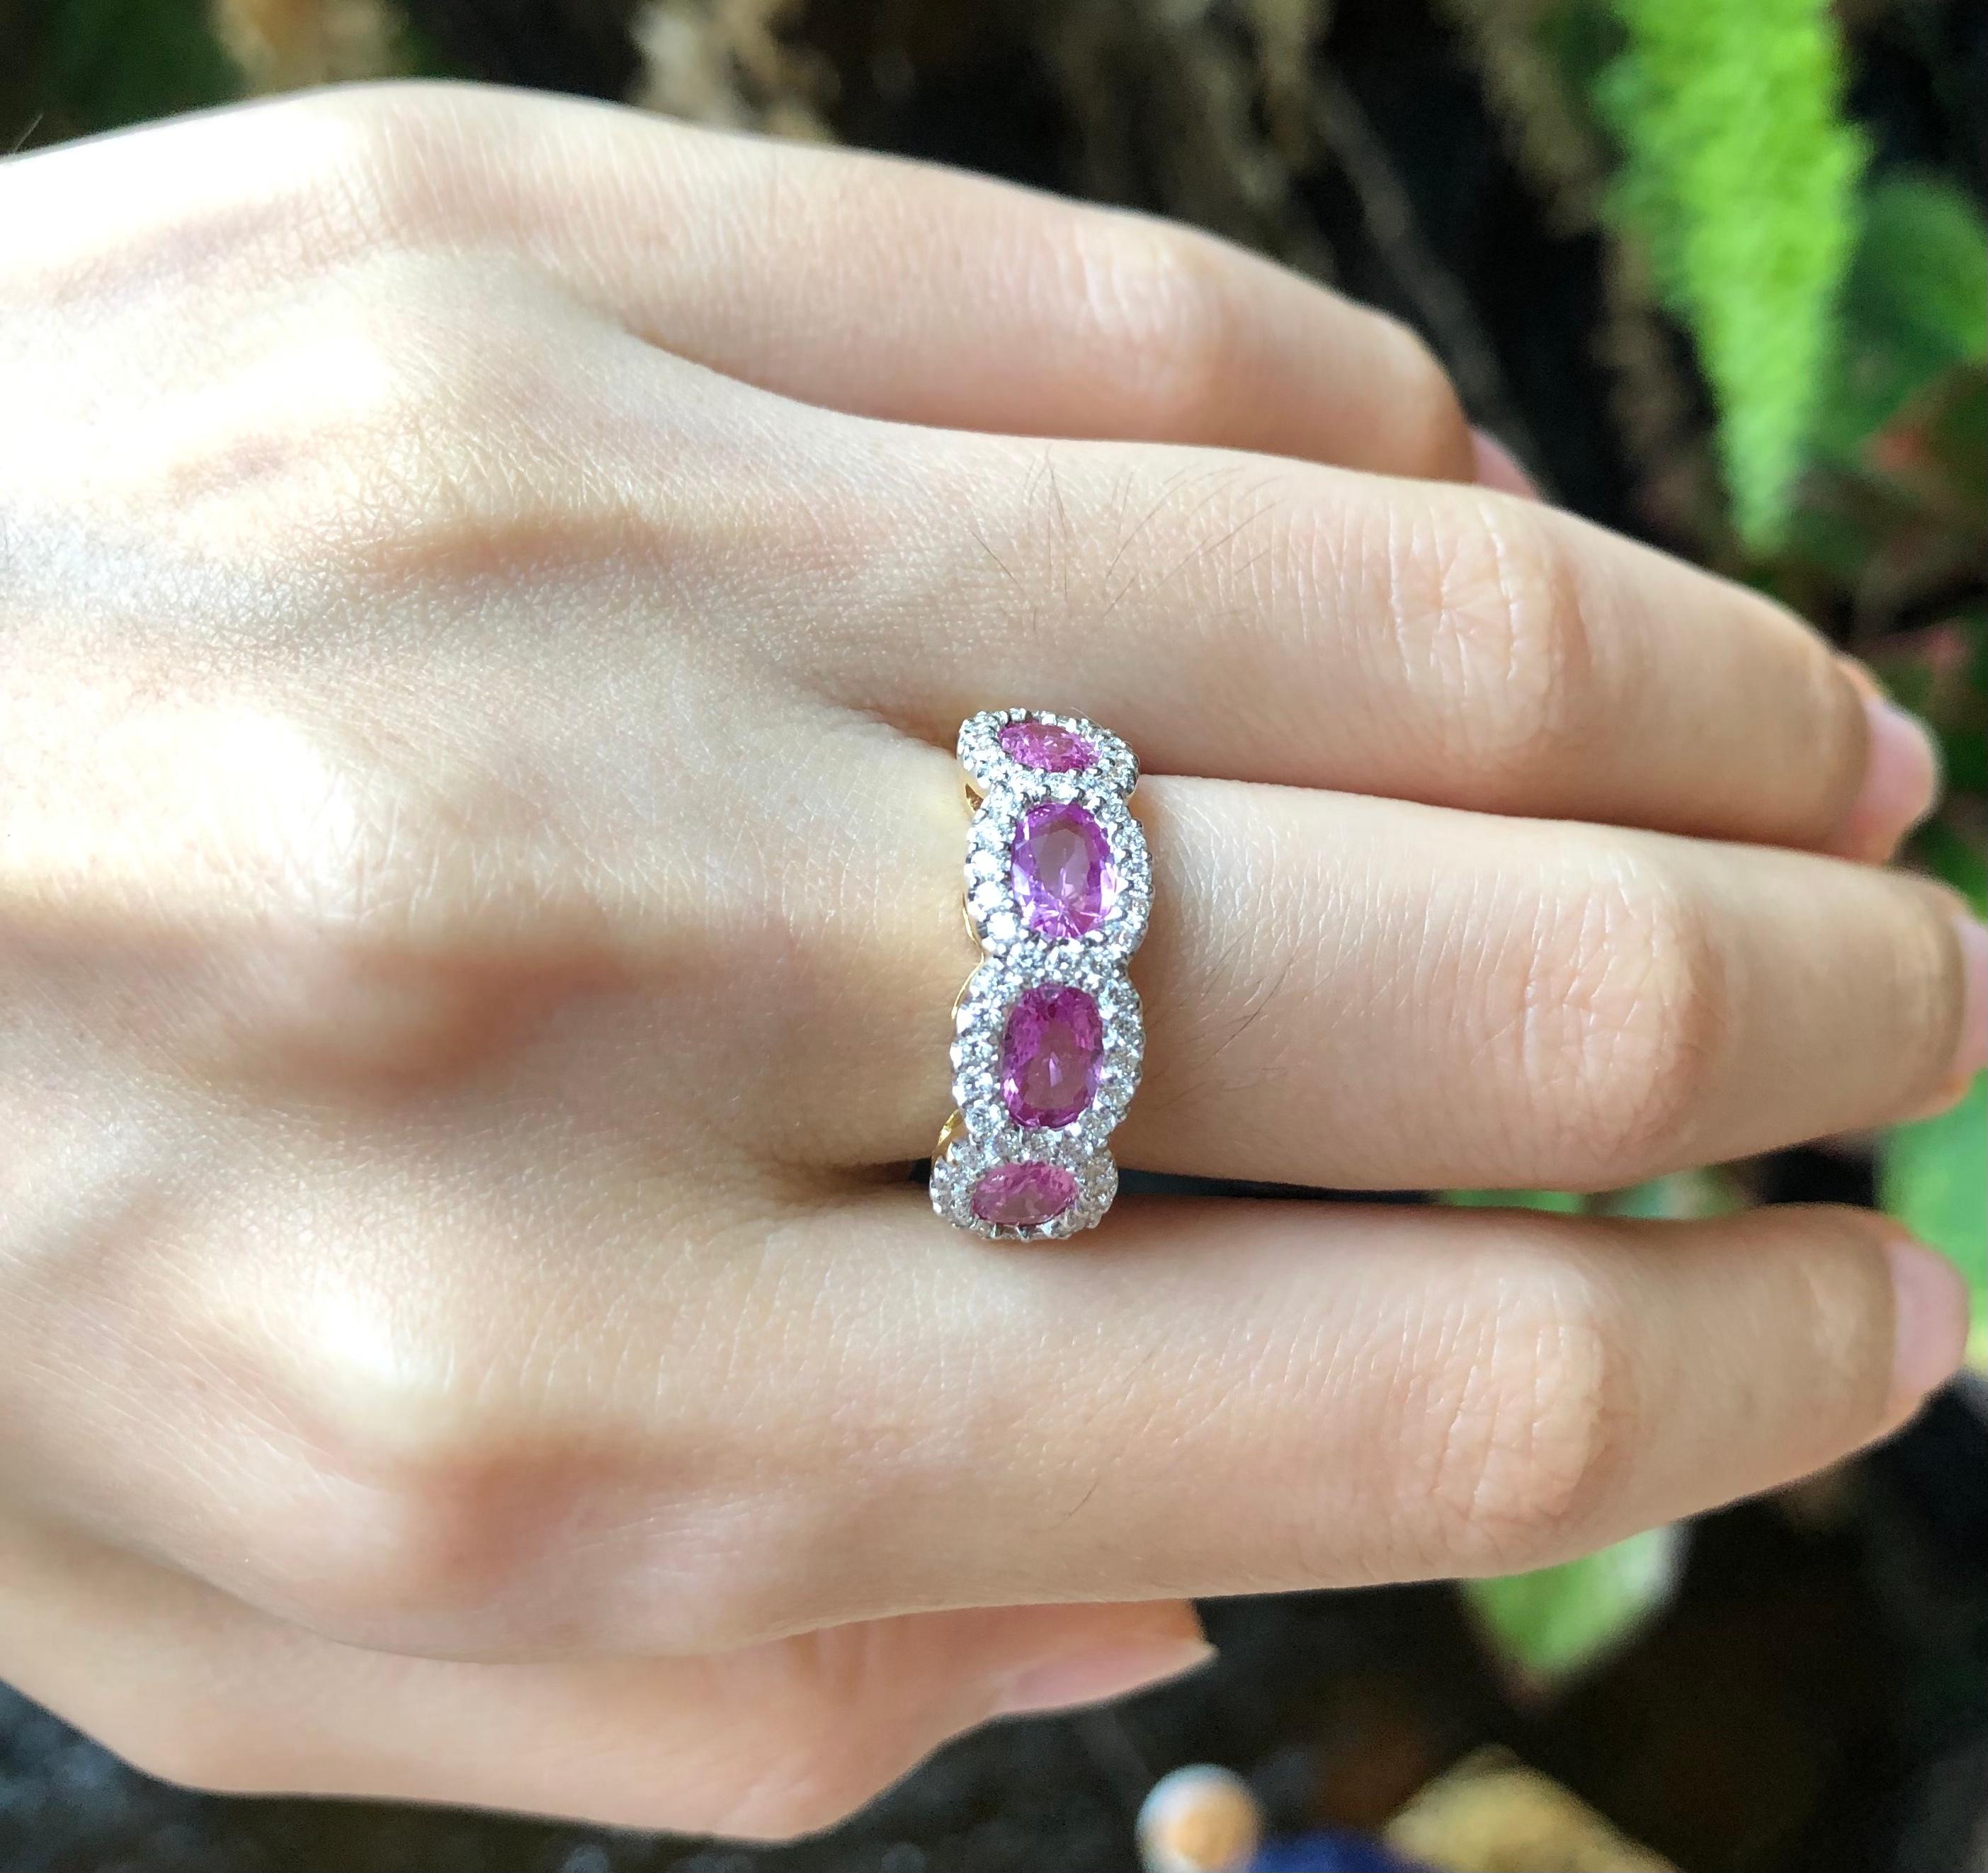 Pink Sapphire 2.17 carats with Diamond 0.52 carat Ring set in 18 Karat Gold Settings

Width:  2.2 cm 
Length: 0.8 cm
Ring Size: 54
Total Weight: 7.28 grams

